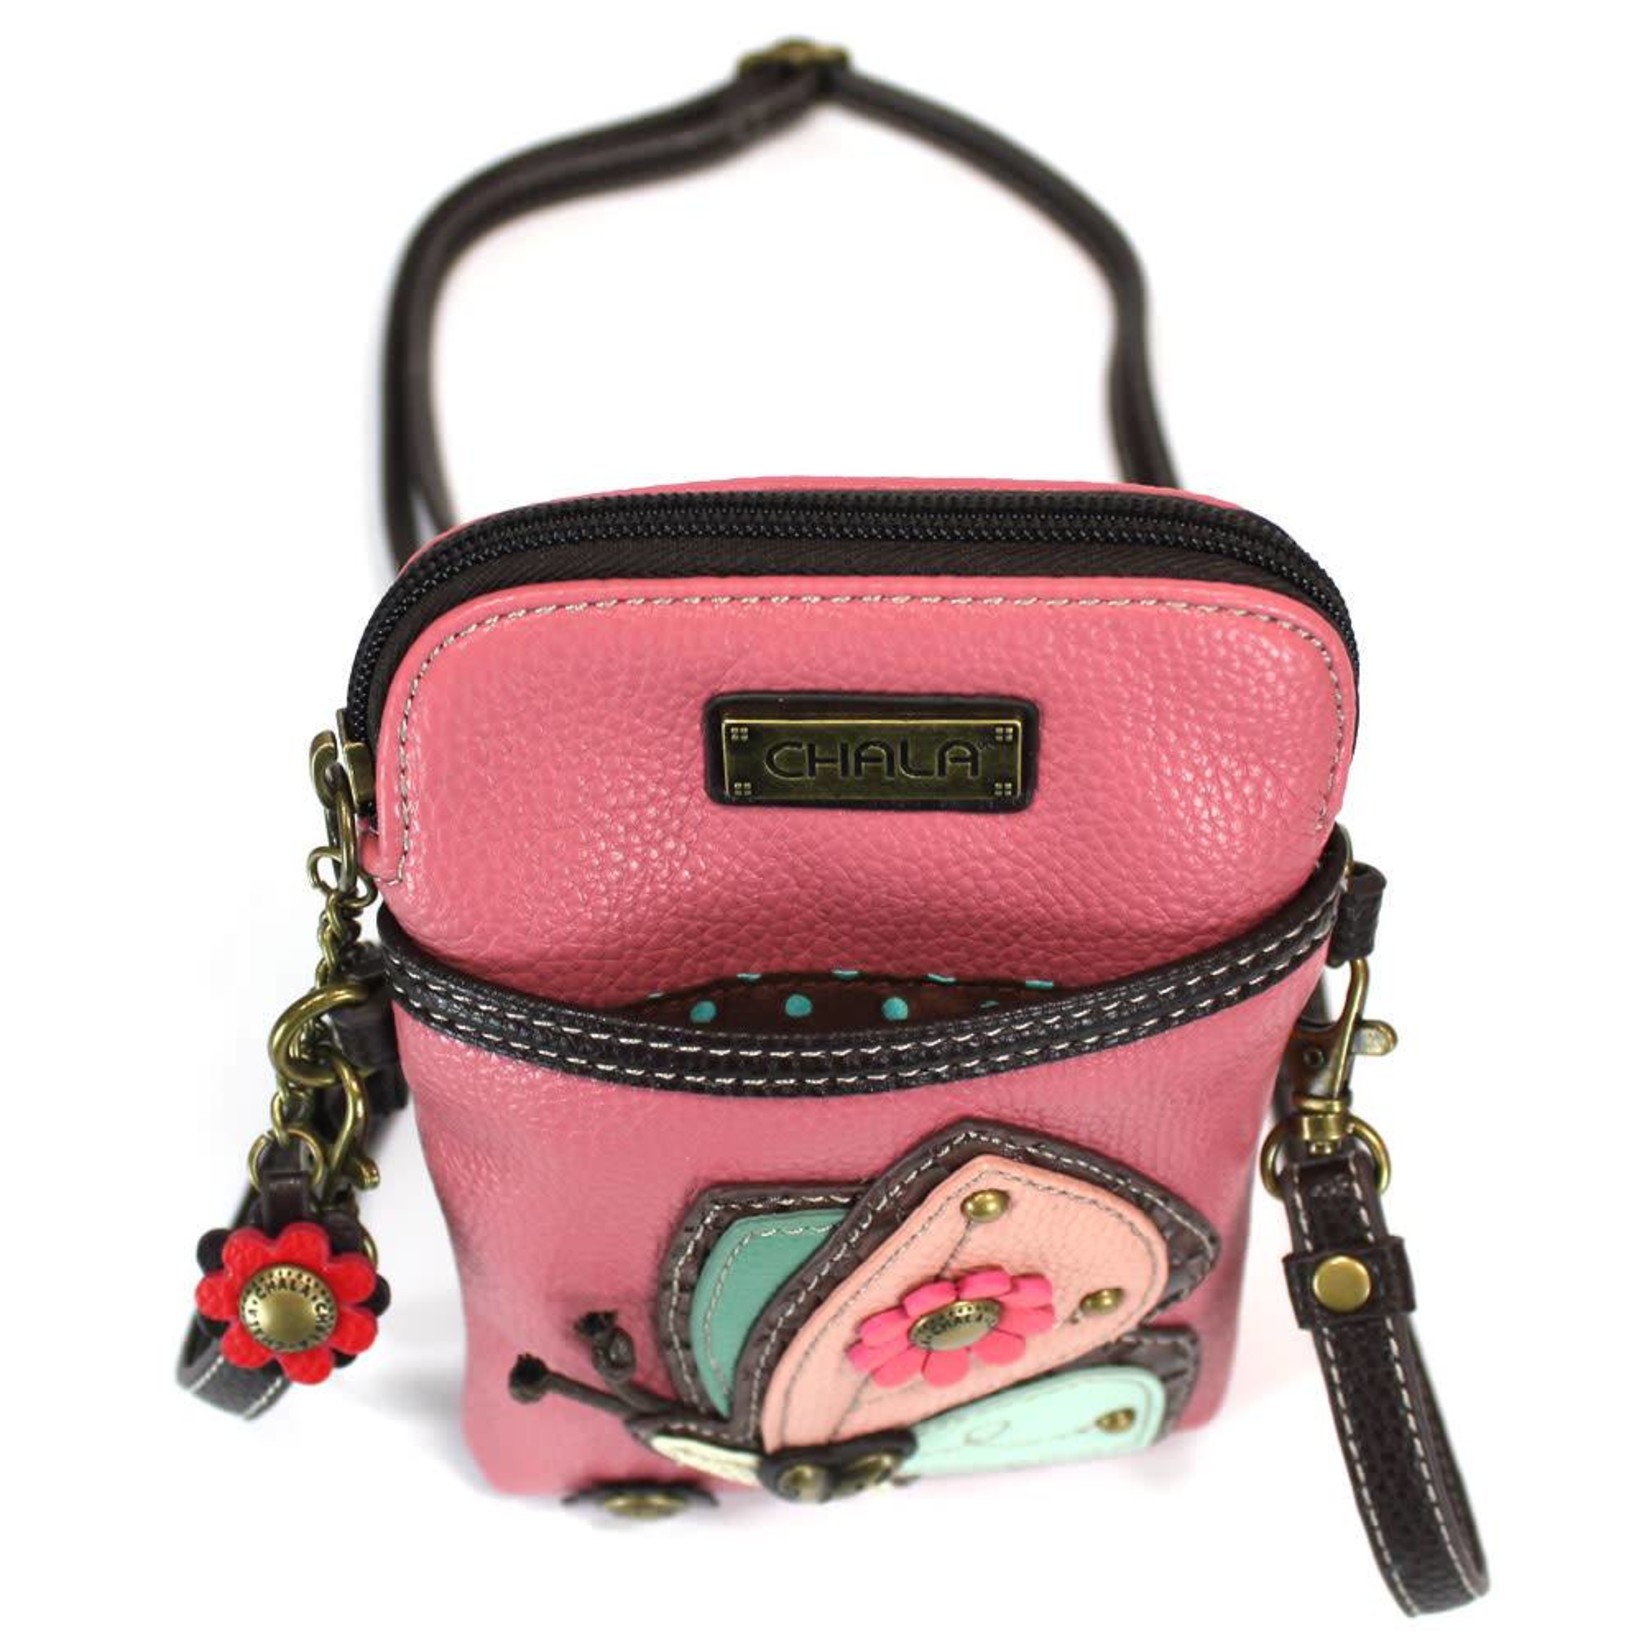 Chala Cell Phone Crossbody - Butterfly Pink